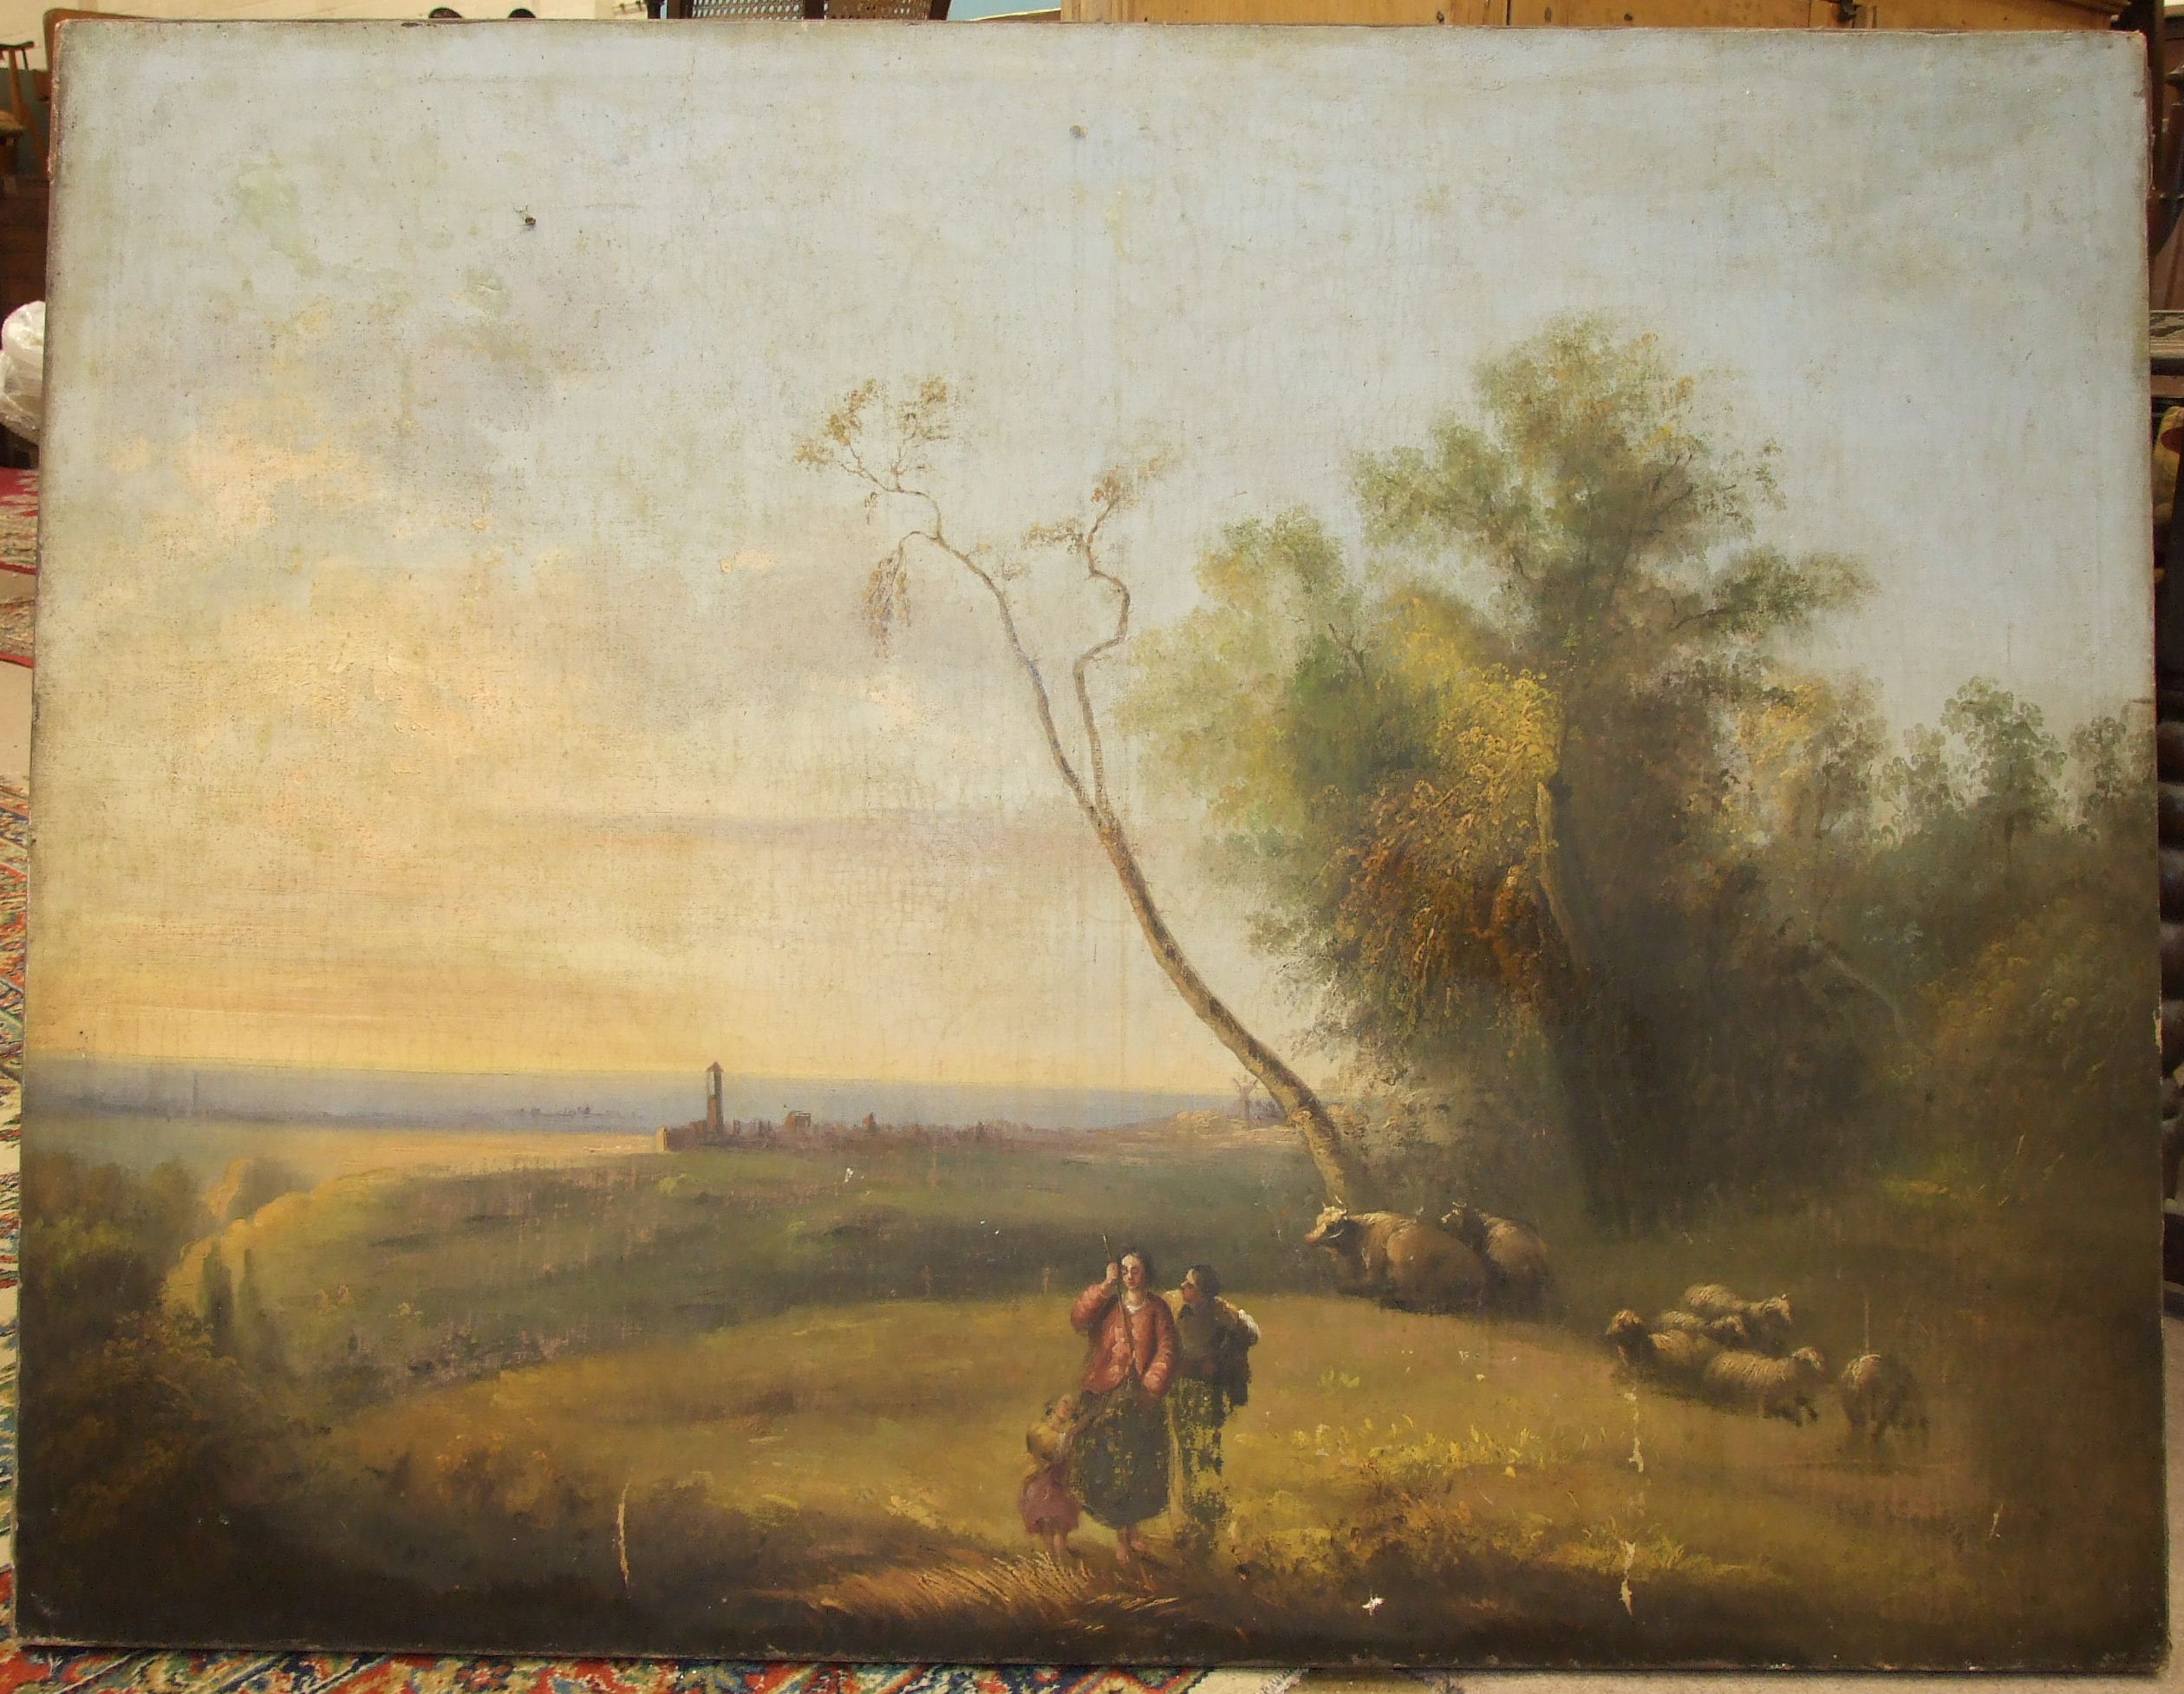 19th century Continental School LANDSCAPE WITH FIGURES AND SHEEP IN THE FOREGROUND Oil on canvas,